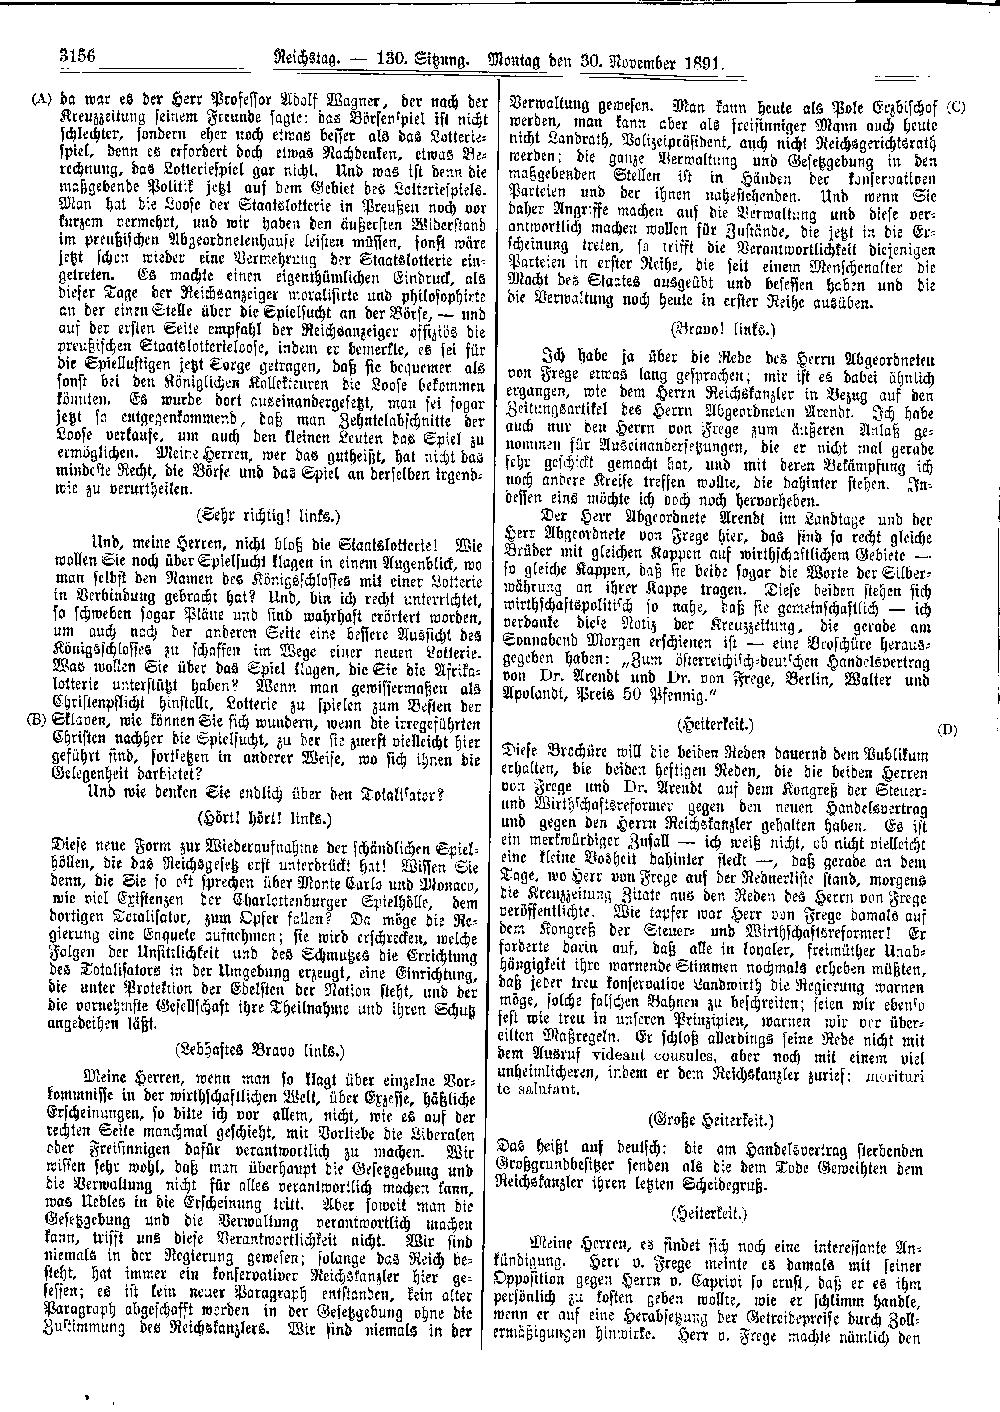 Scan of page 3156